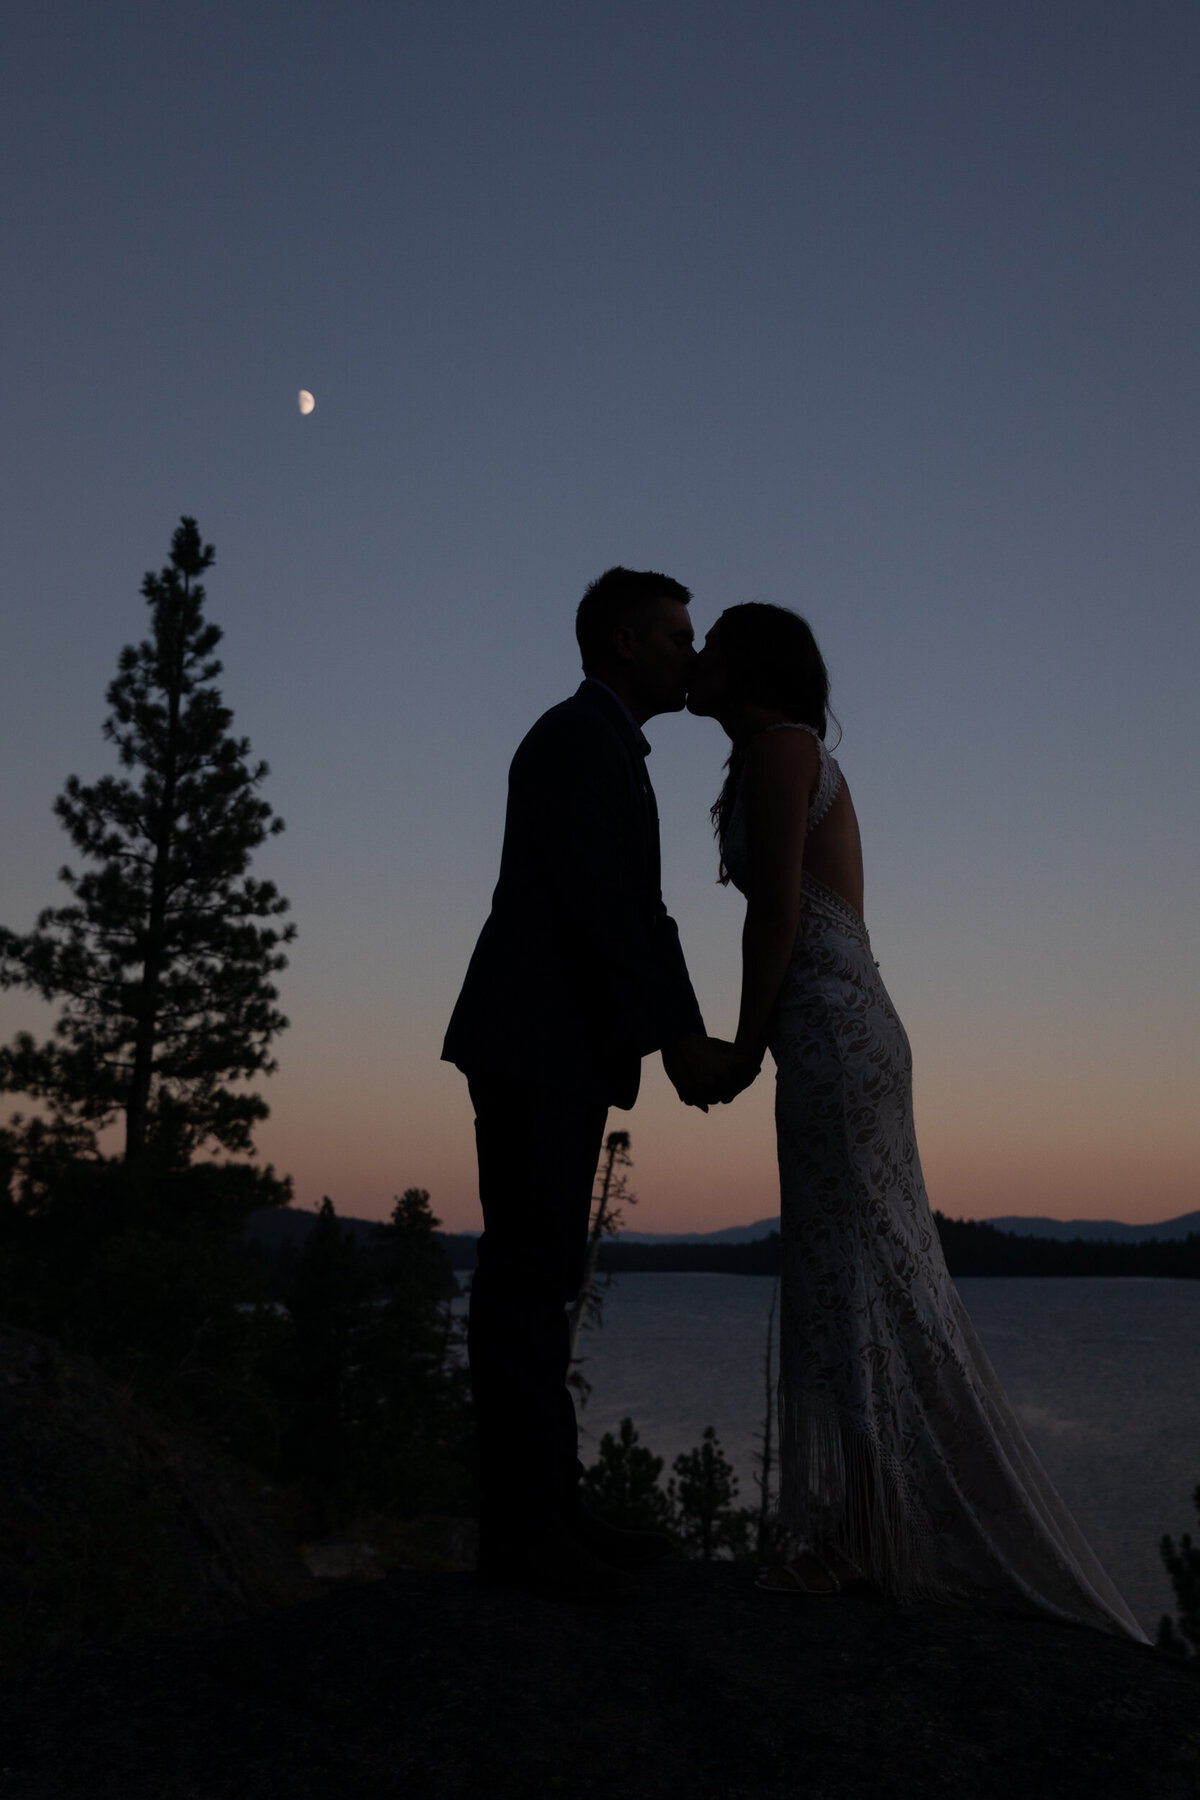 The silhouette of a bride and groom kissing